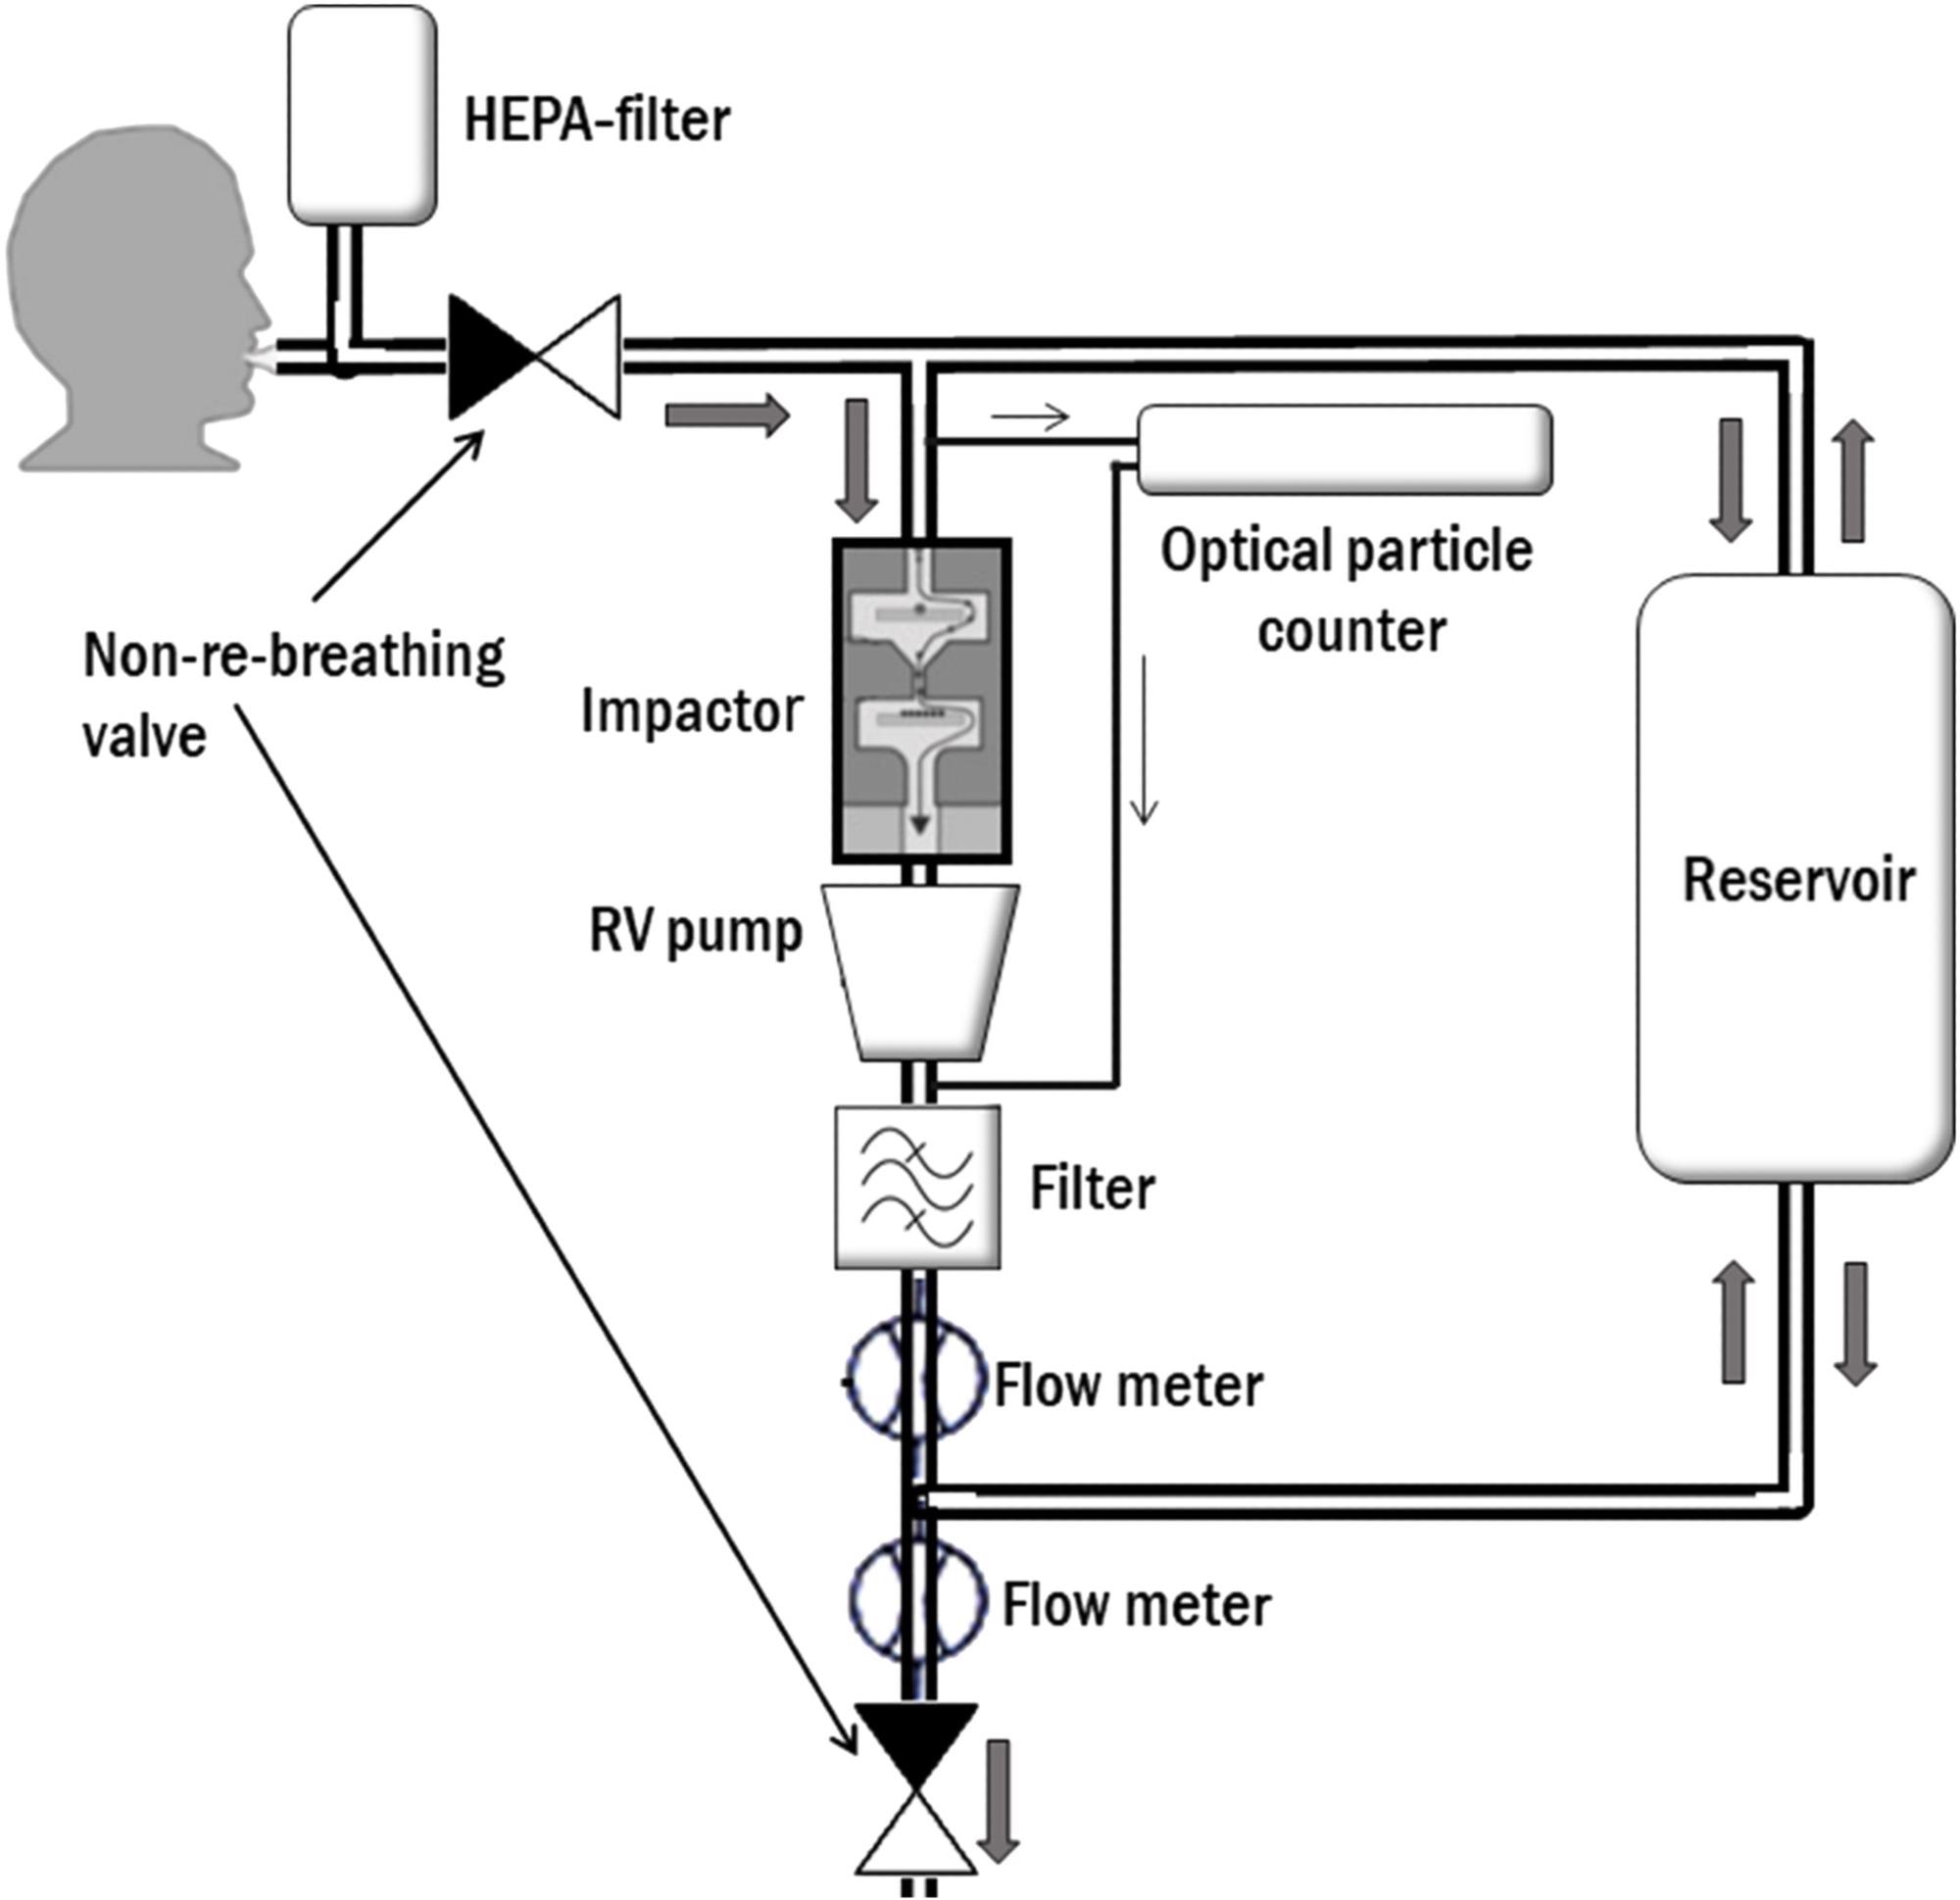 Schematic illustration of the particles in exhaled air (PExA) instrument set-up at collection. Subject breaths through a mouthpiece, connected to a two-way, non-re-breathing valve, where inhalation goes through a high-efficiency particle arresting (HEPA) filter, and exhalation go into the instrument. An optical particle counter samples a fraction of the exhaled air with a constant flow of 20 ml/s. The two-stage inertial impactor collects particles according to size by the control of a rotary vane (RV) pump with a constant flow of 230 ml/s. A reservoir handles exhalations that exceed the flow rate through the impactor